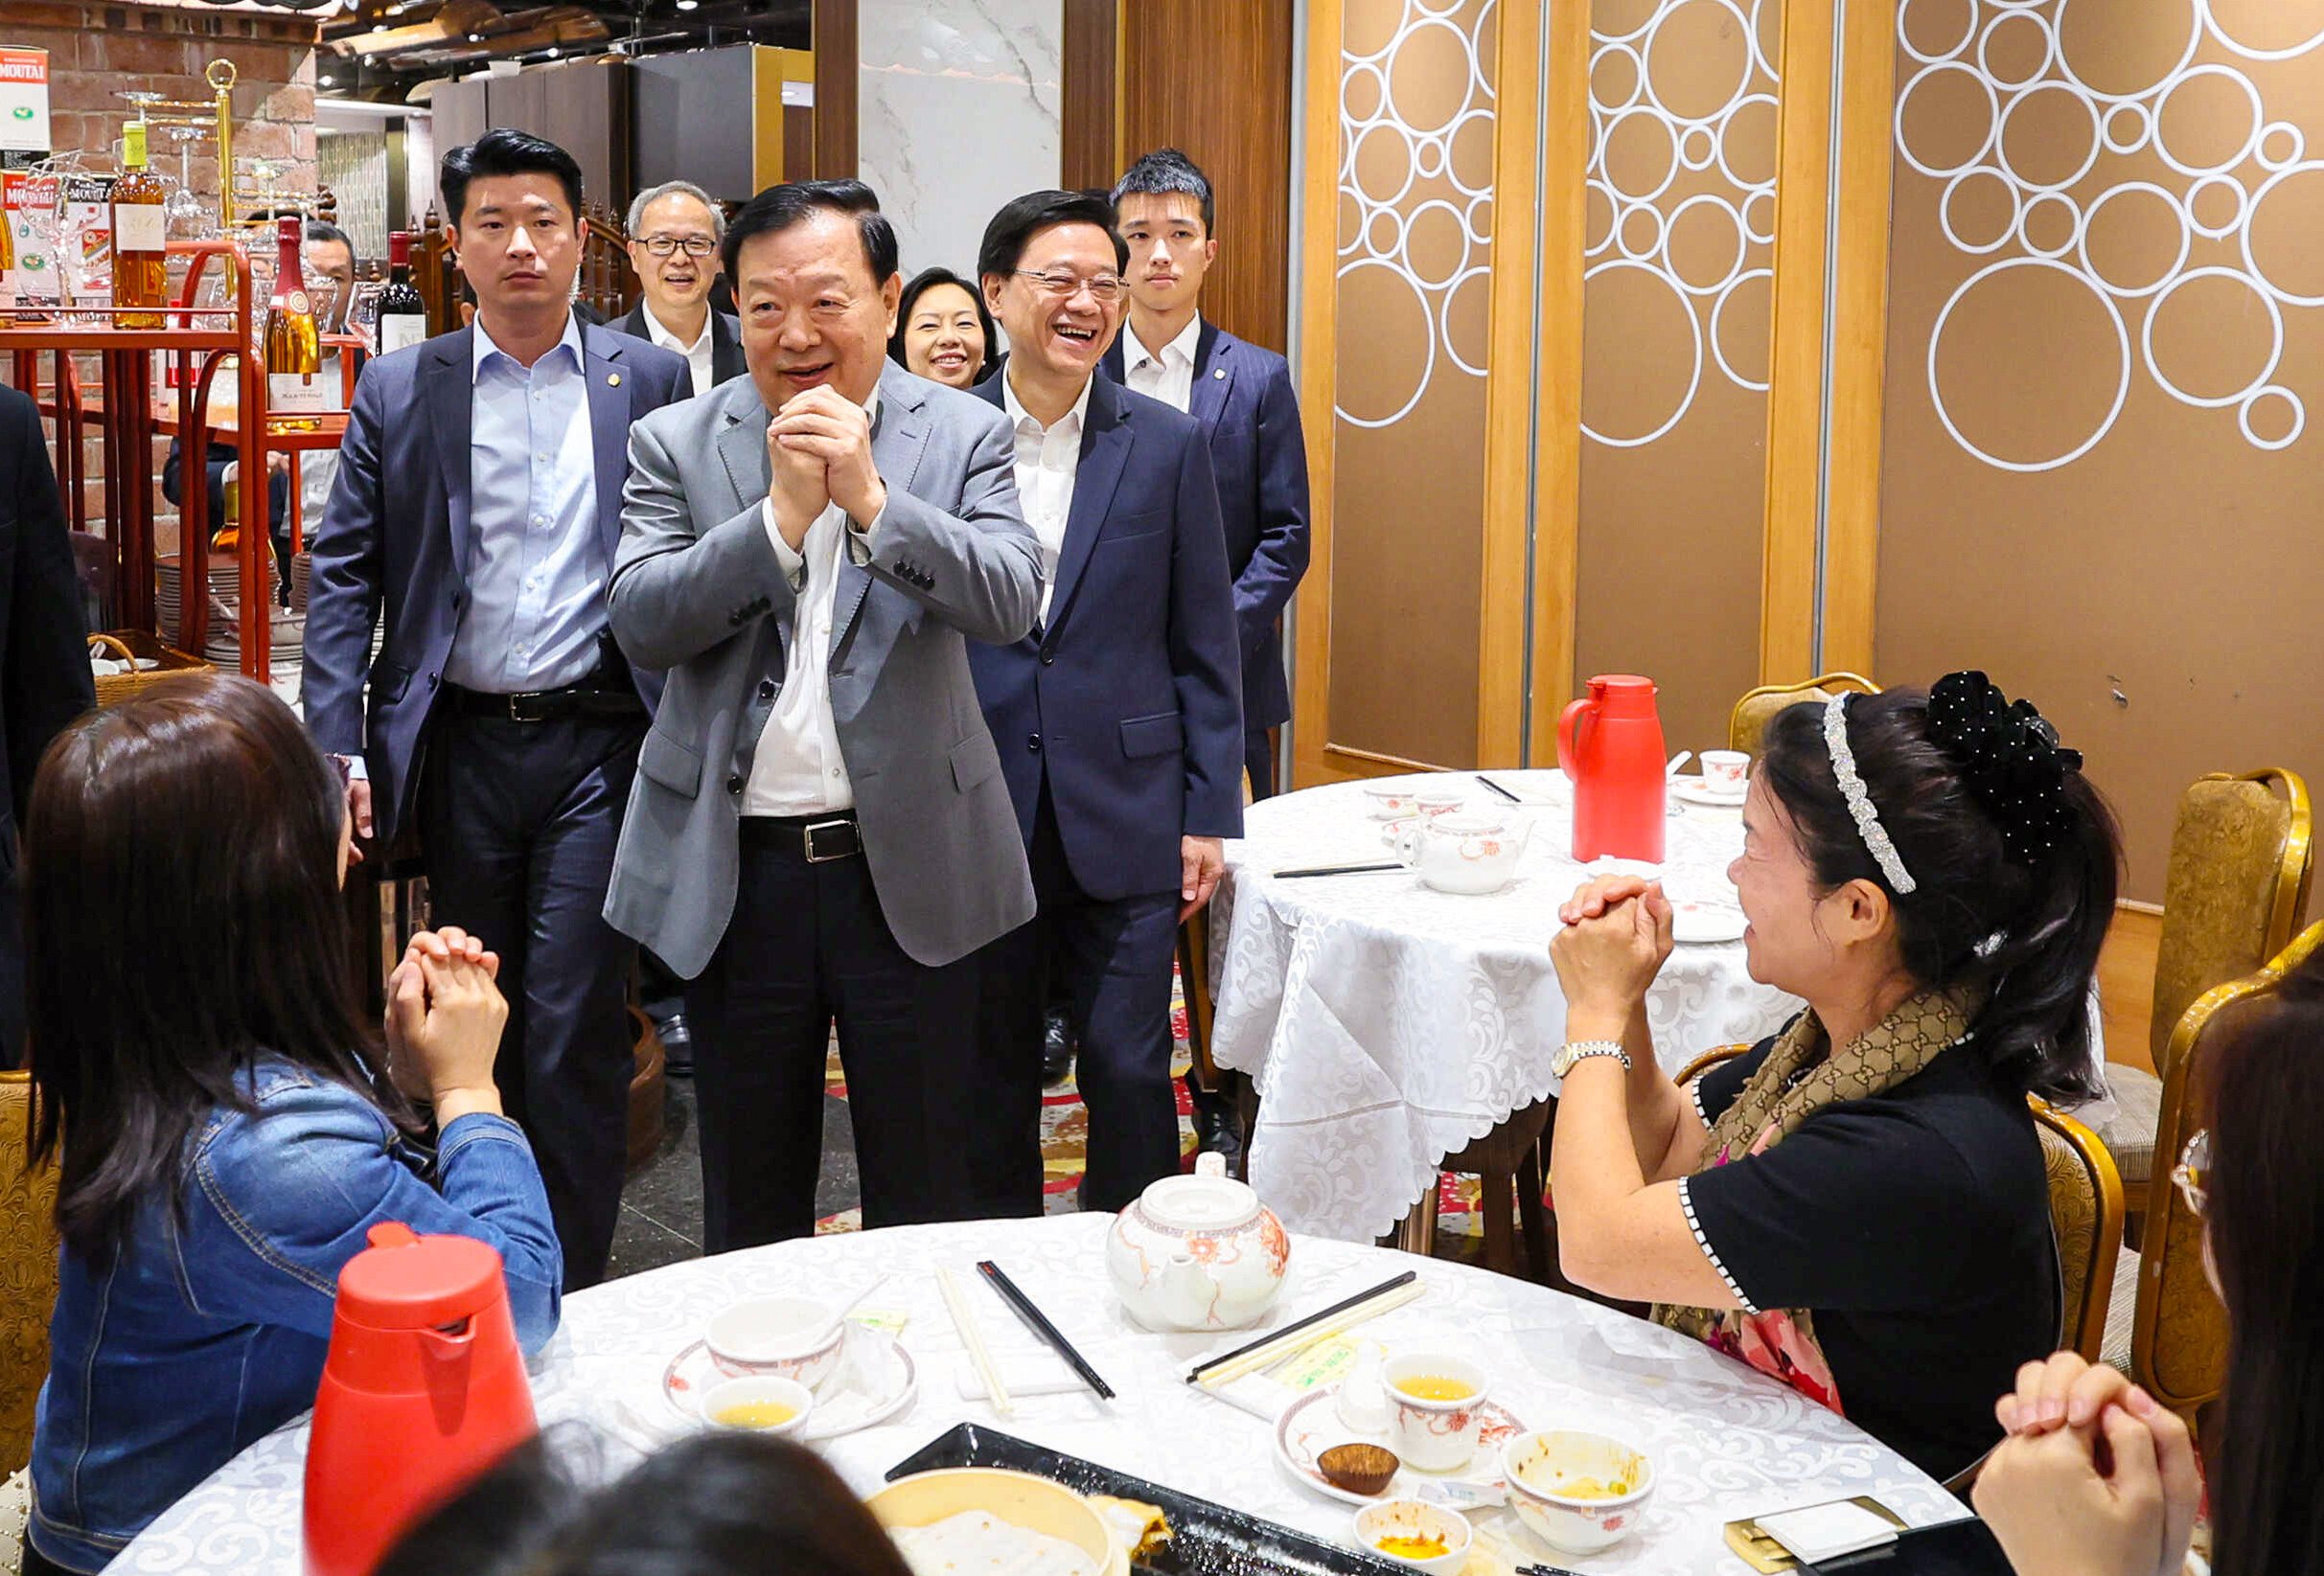 Top Beijing official Xia Baolong (third left) and city leader John Lee Ka-chiu (to the right of Xia) visit a teahouse on Saturday. Photo: SCMP